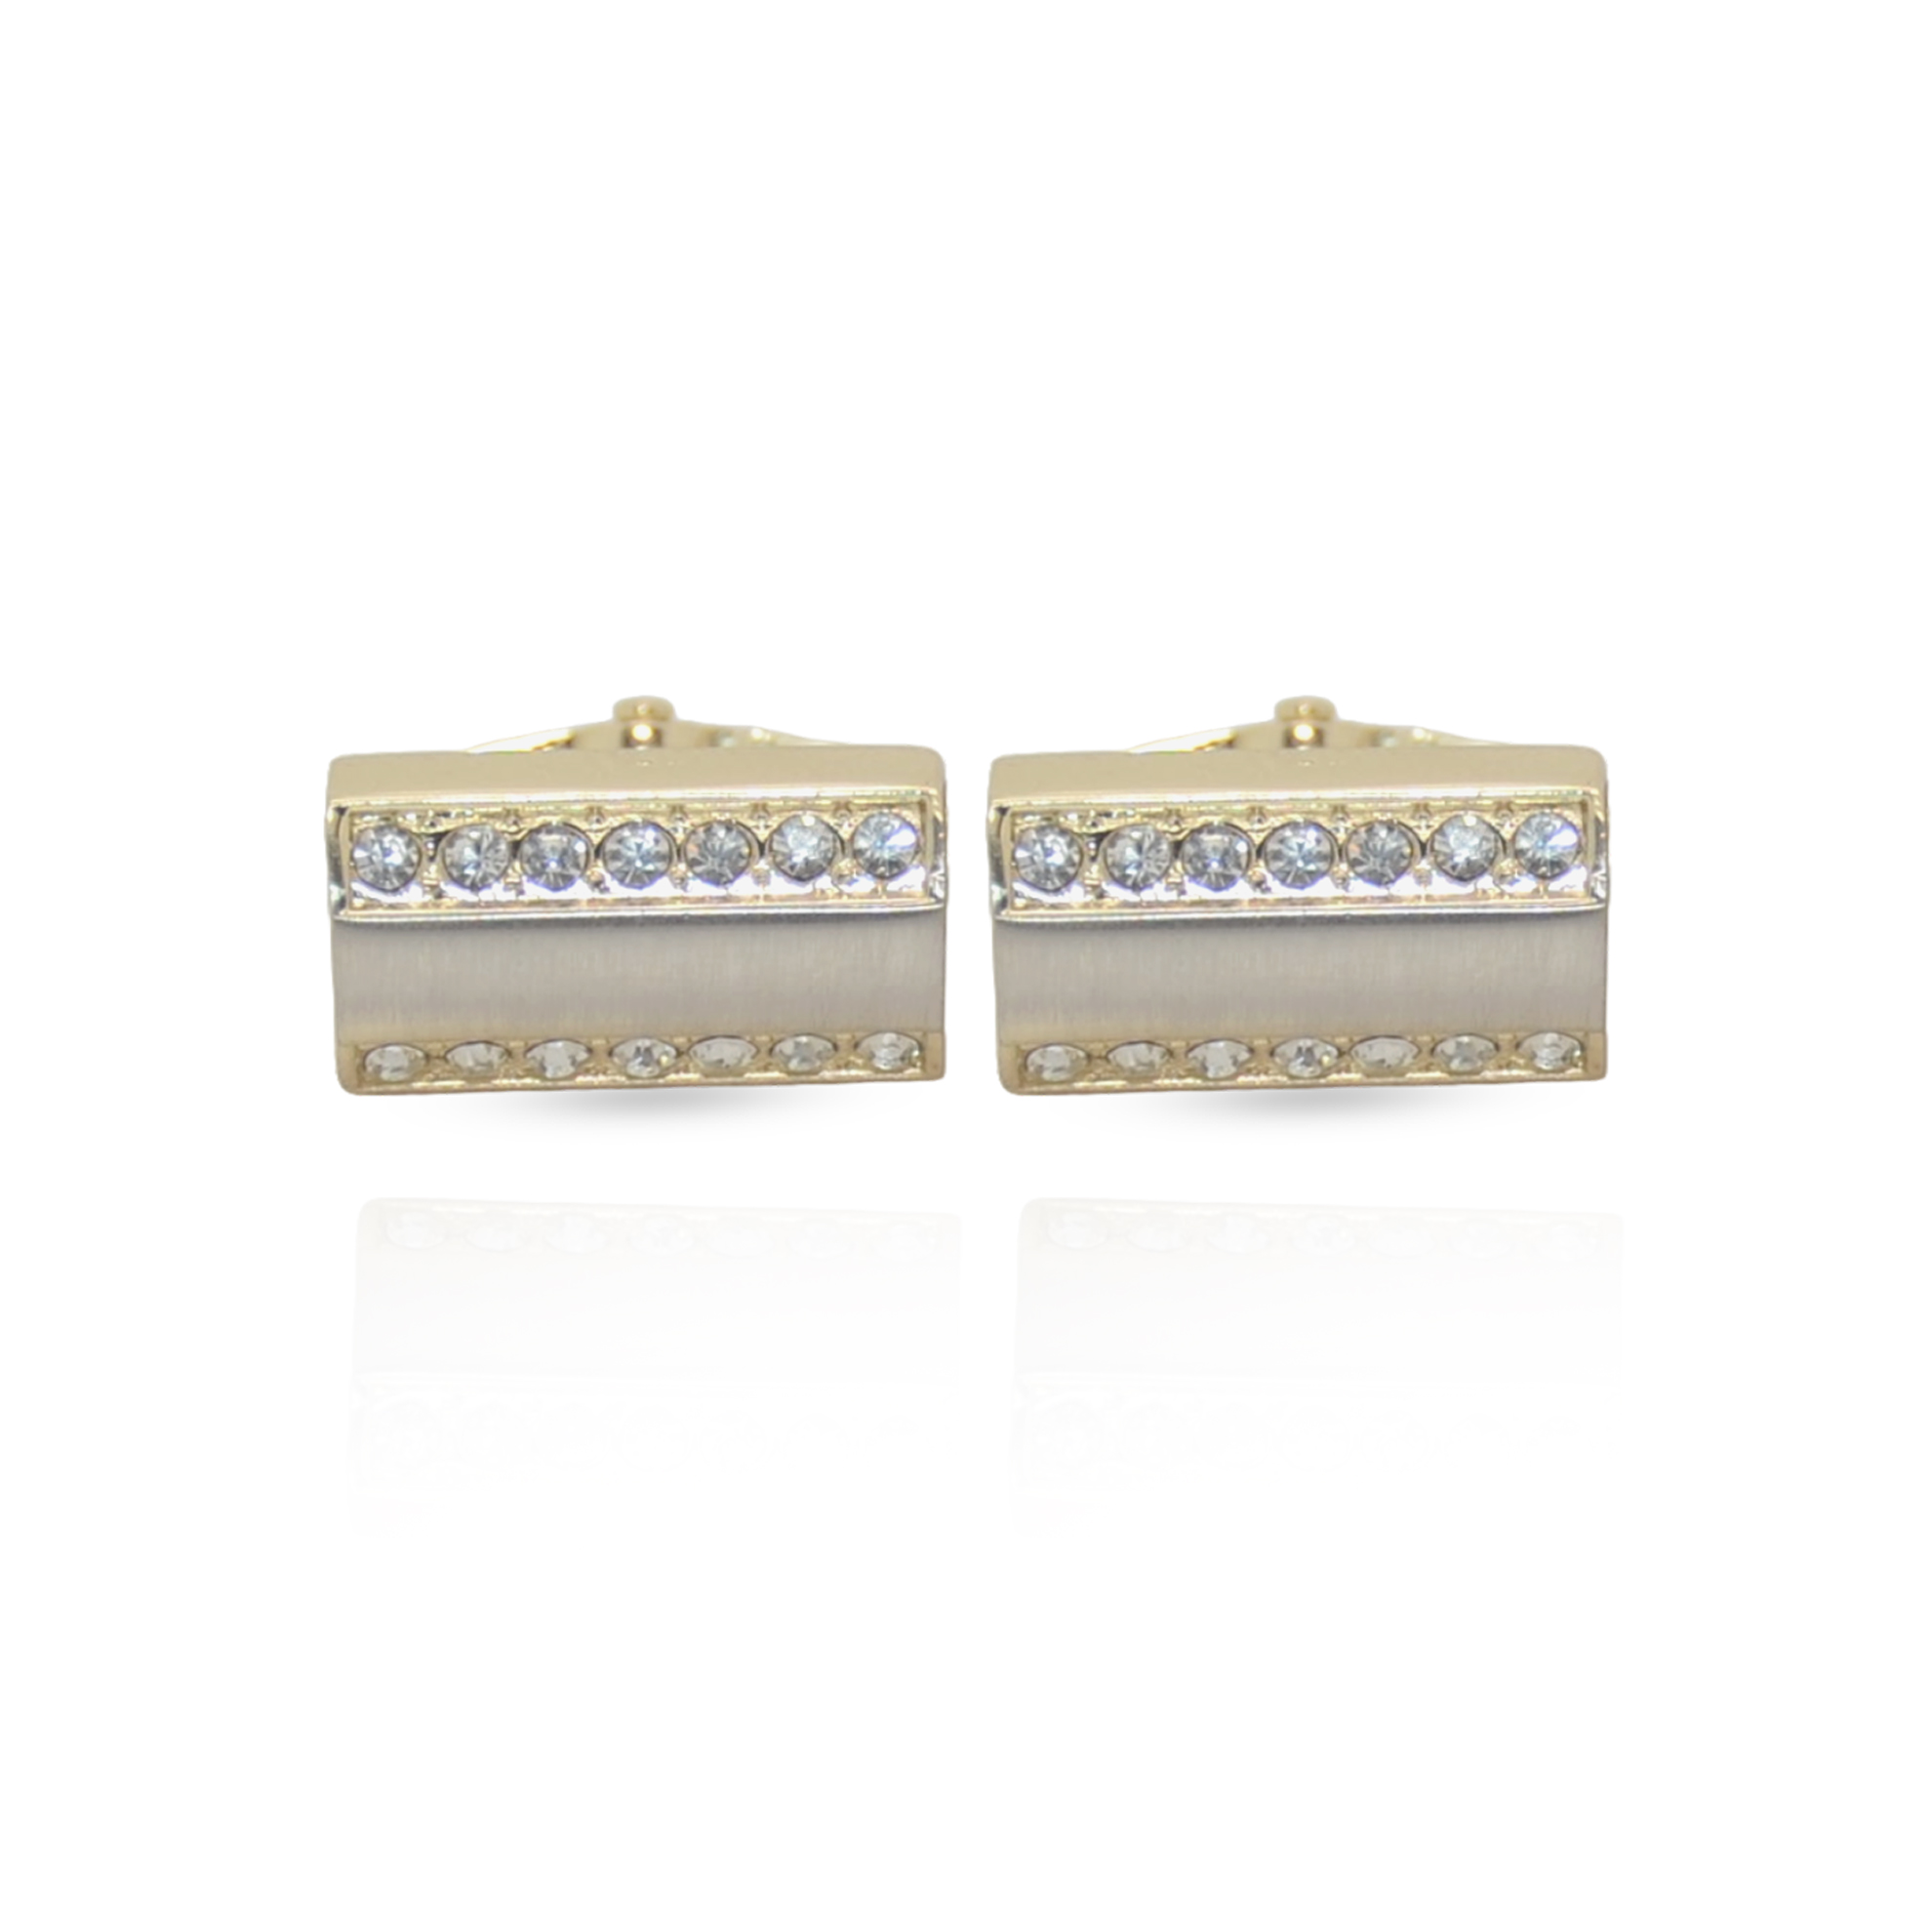 Cufflers Classic Mate Gold Rectangle Crystal Cufflinks with Free Gift Box- CU-0015